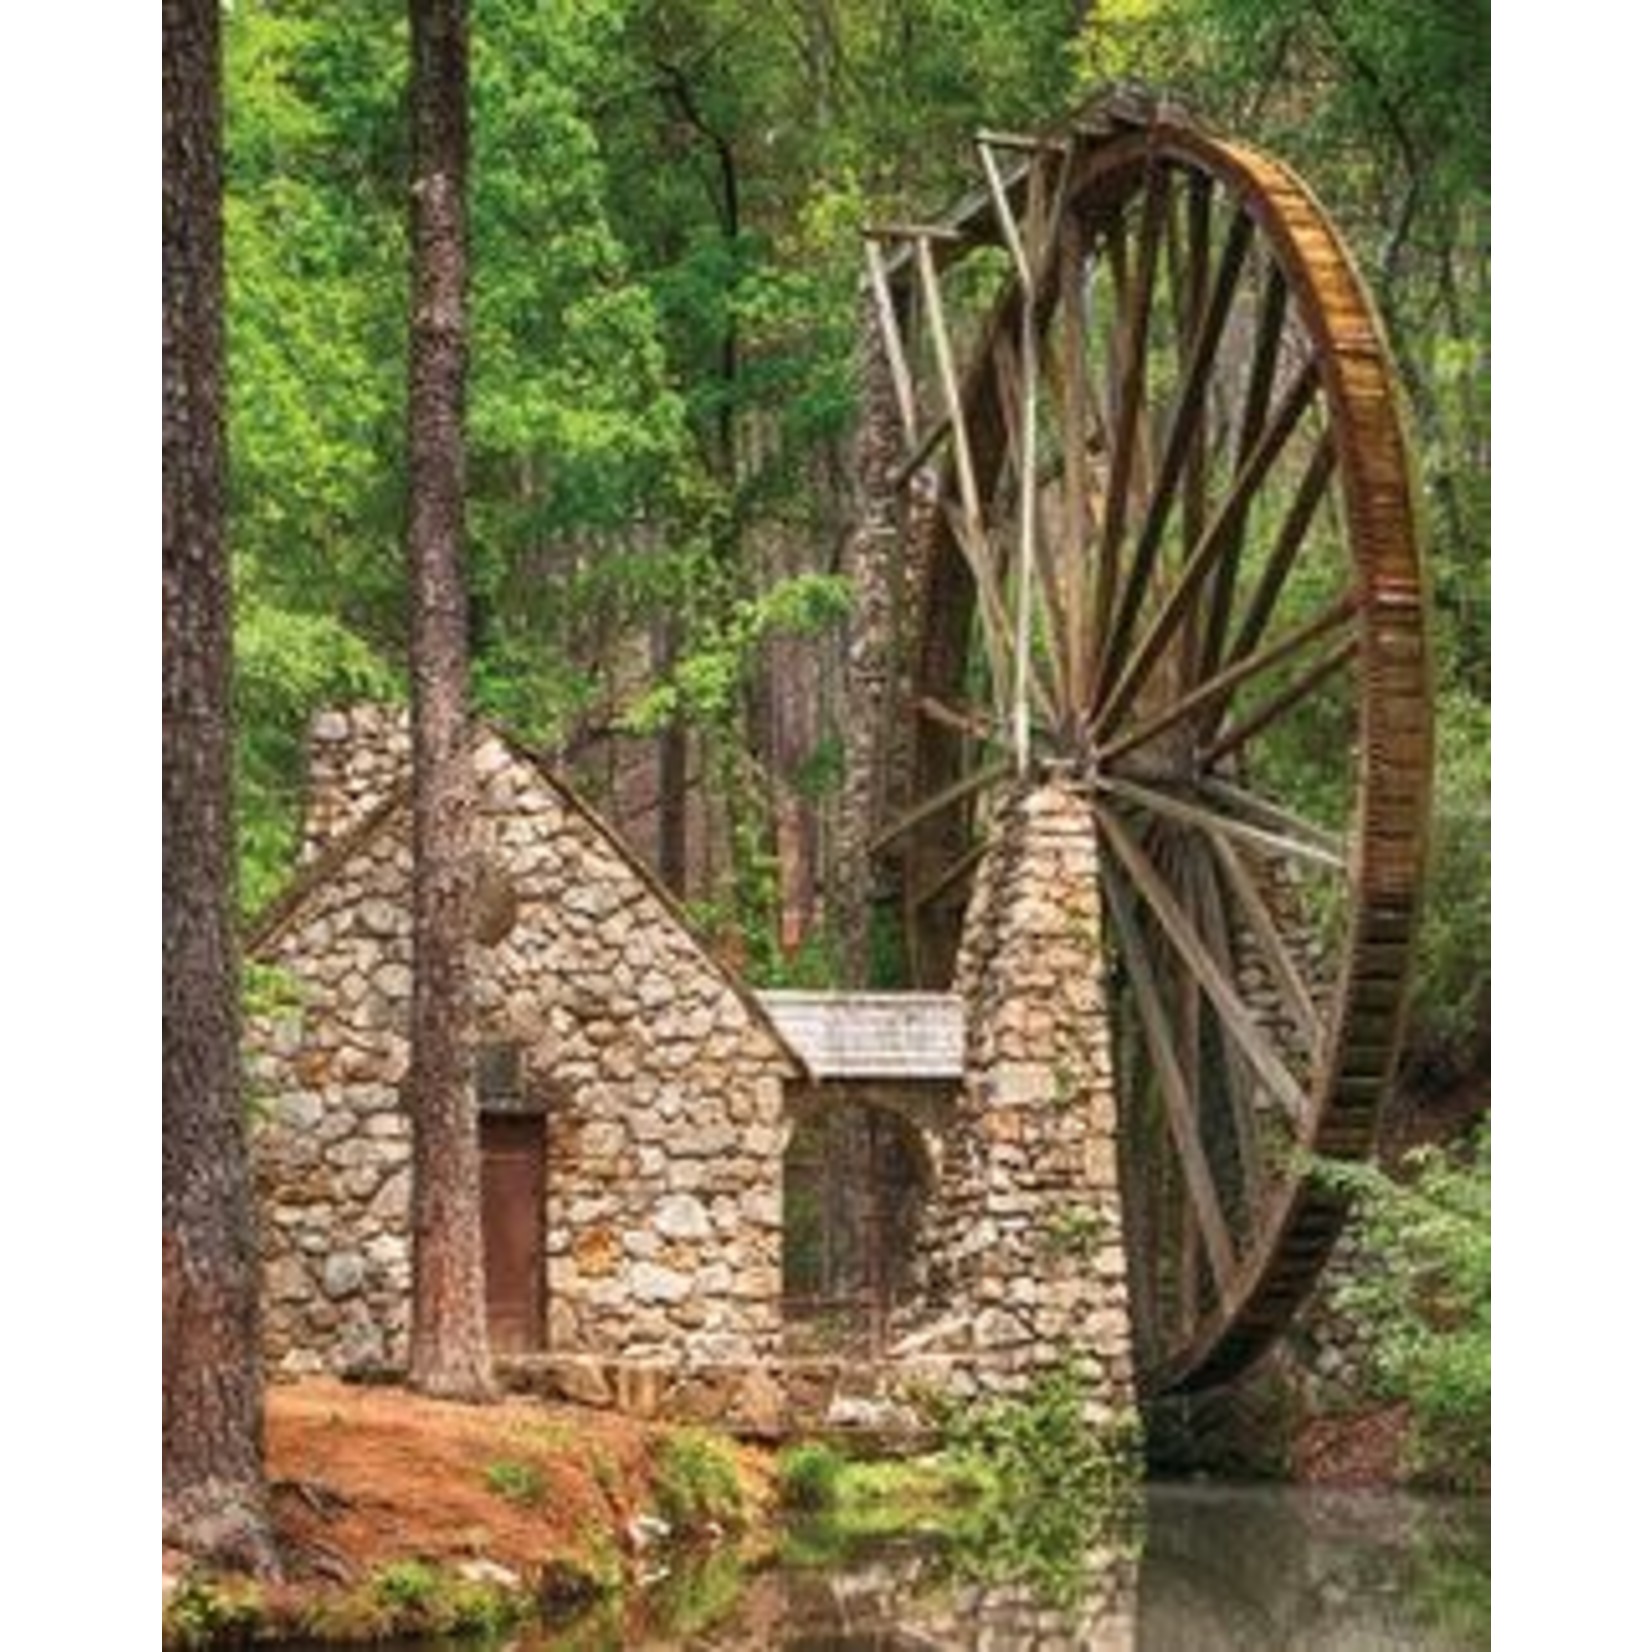 WATER WHEEL PUZZLE 1000PC